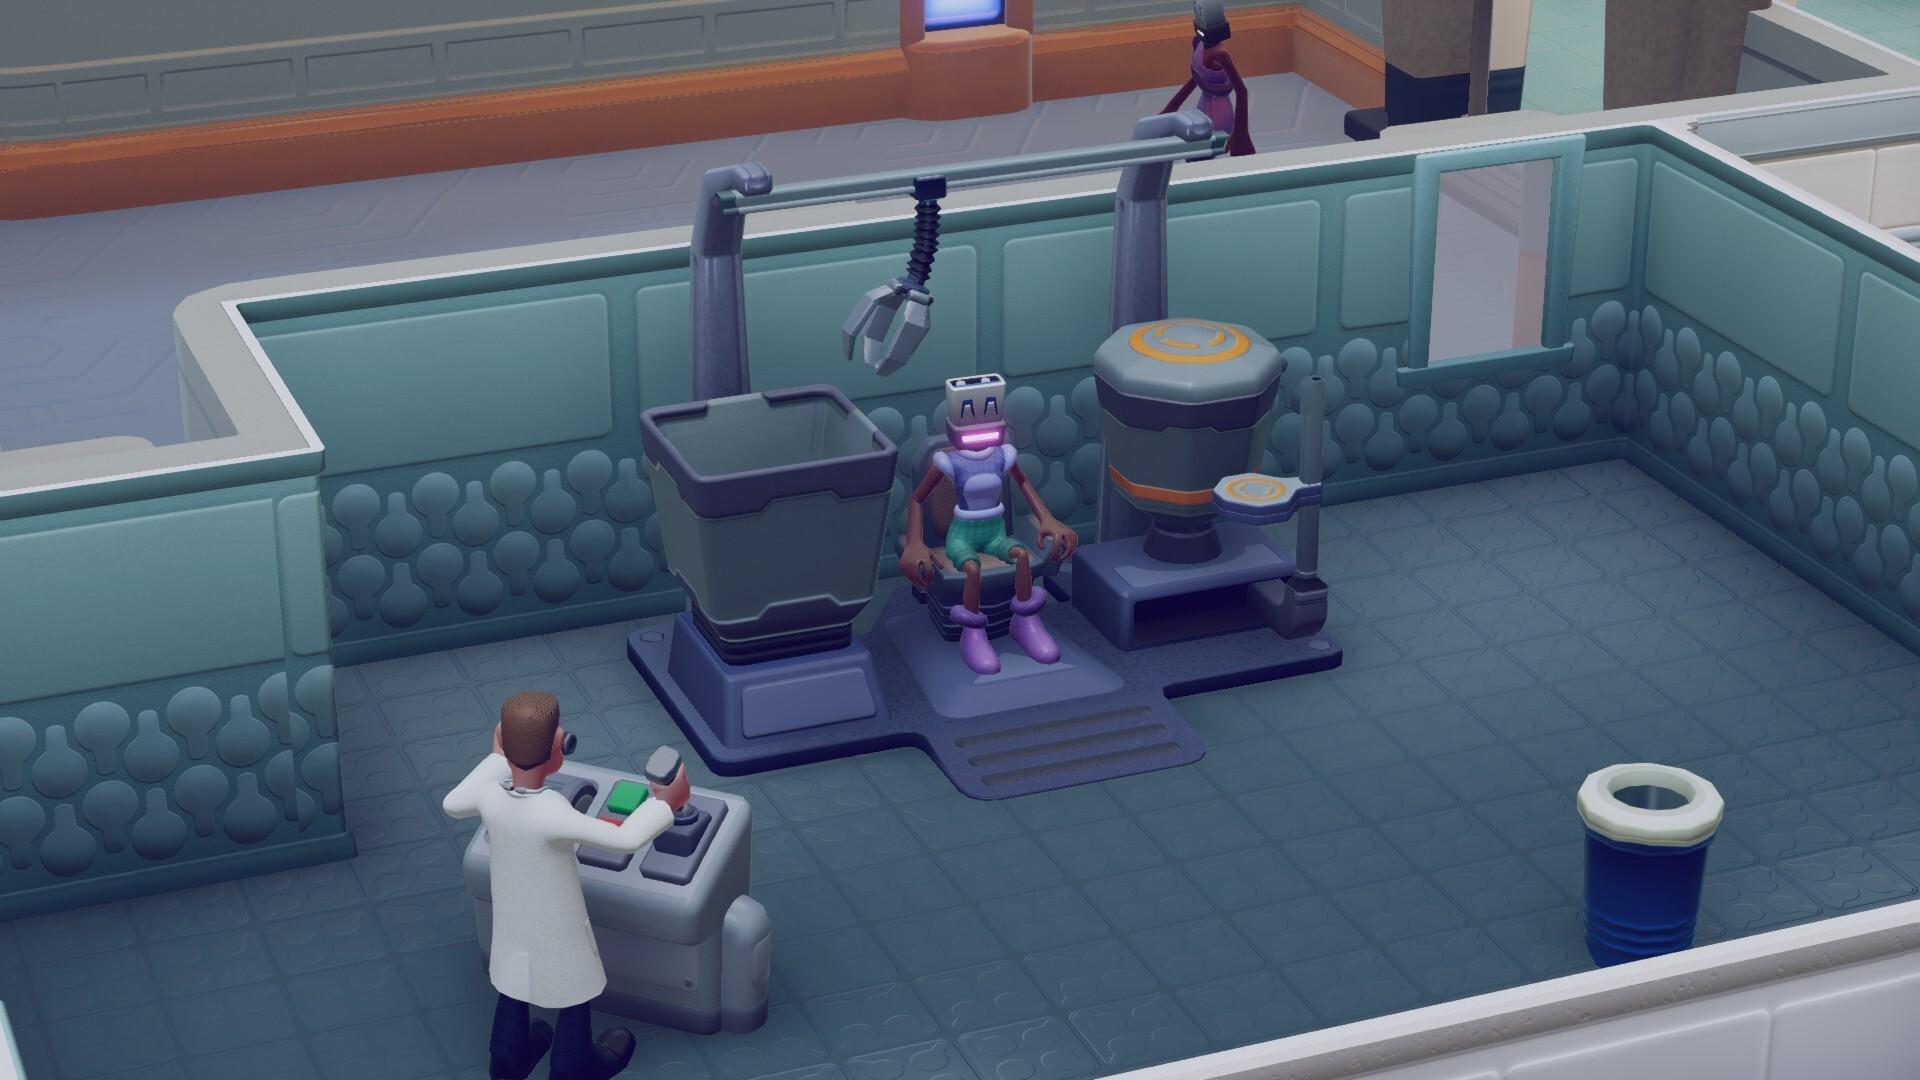 Two Point Hospital: A Stitch in Time